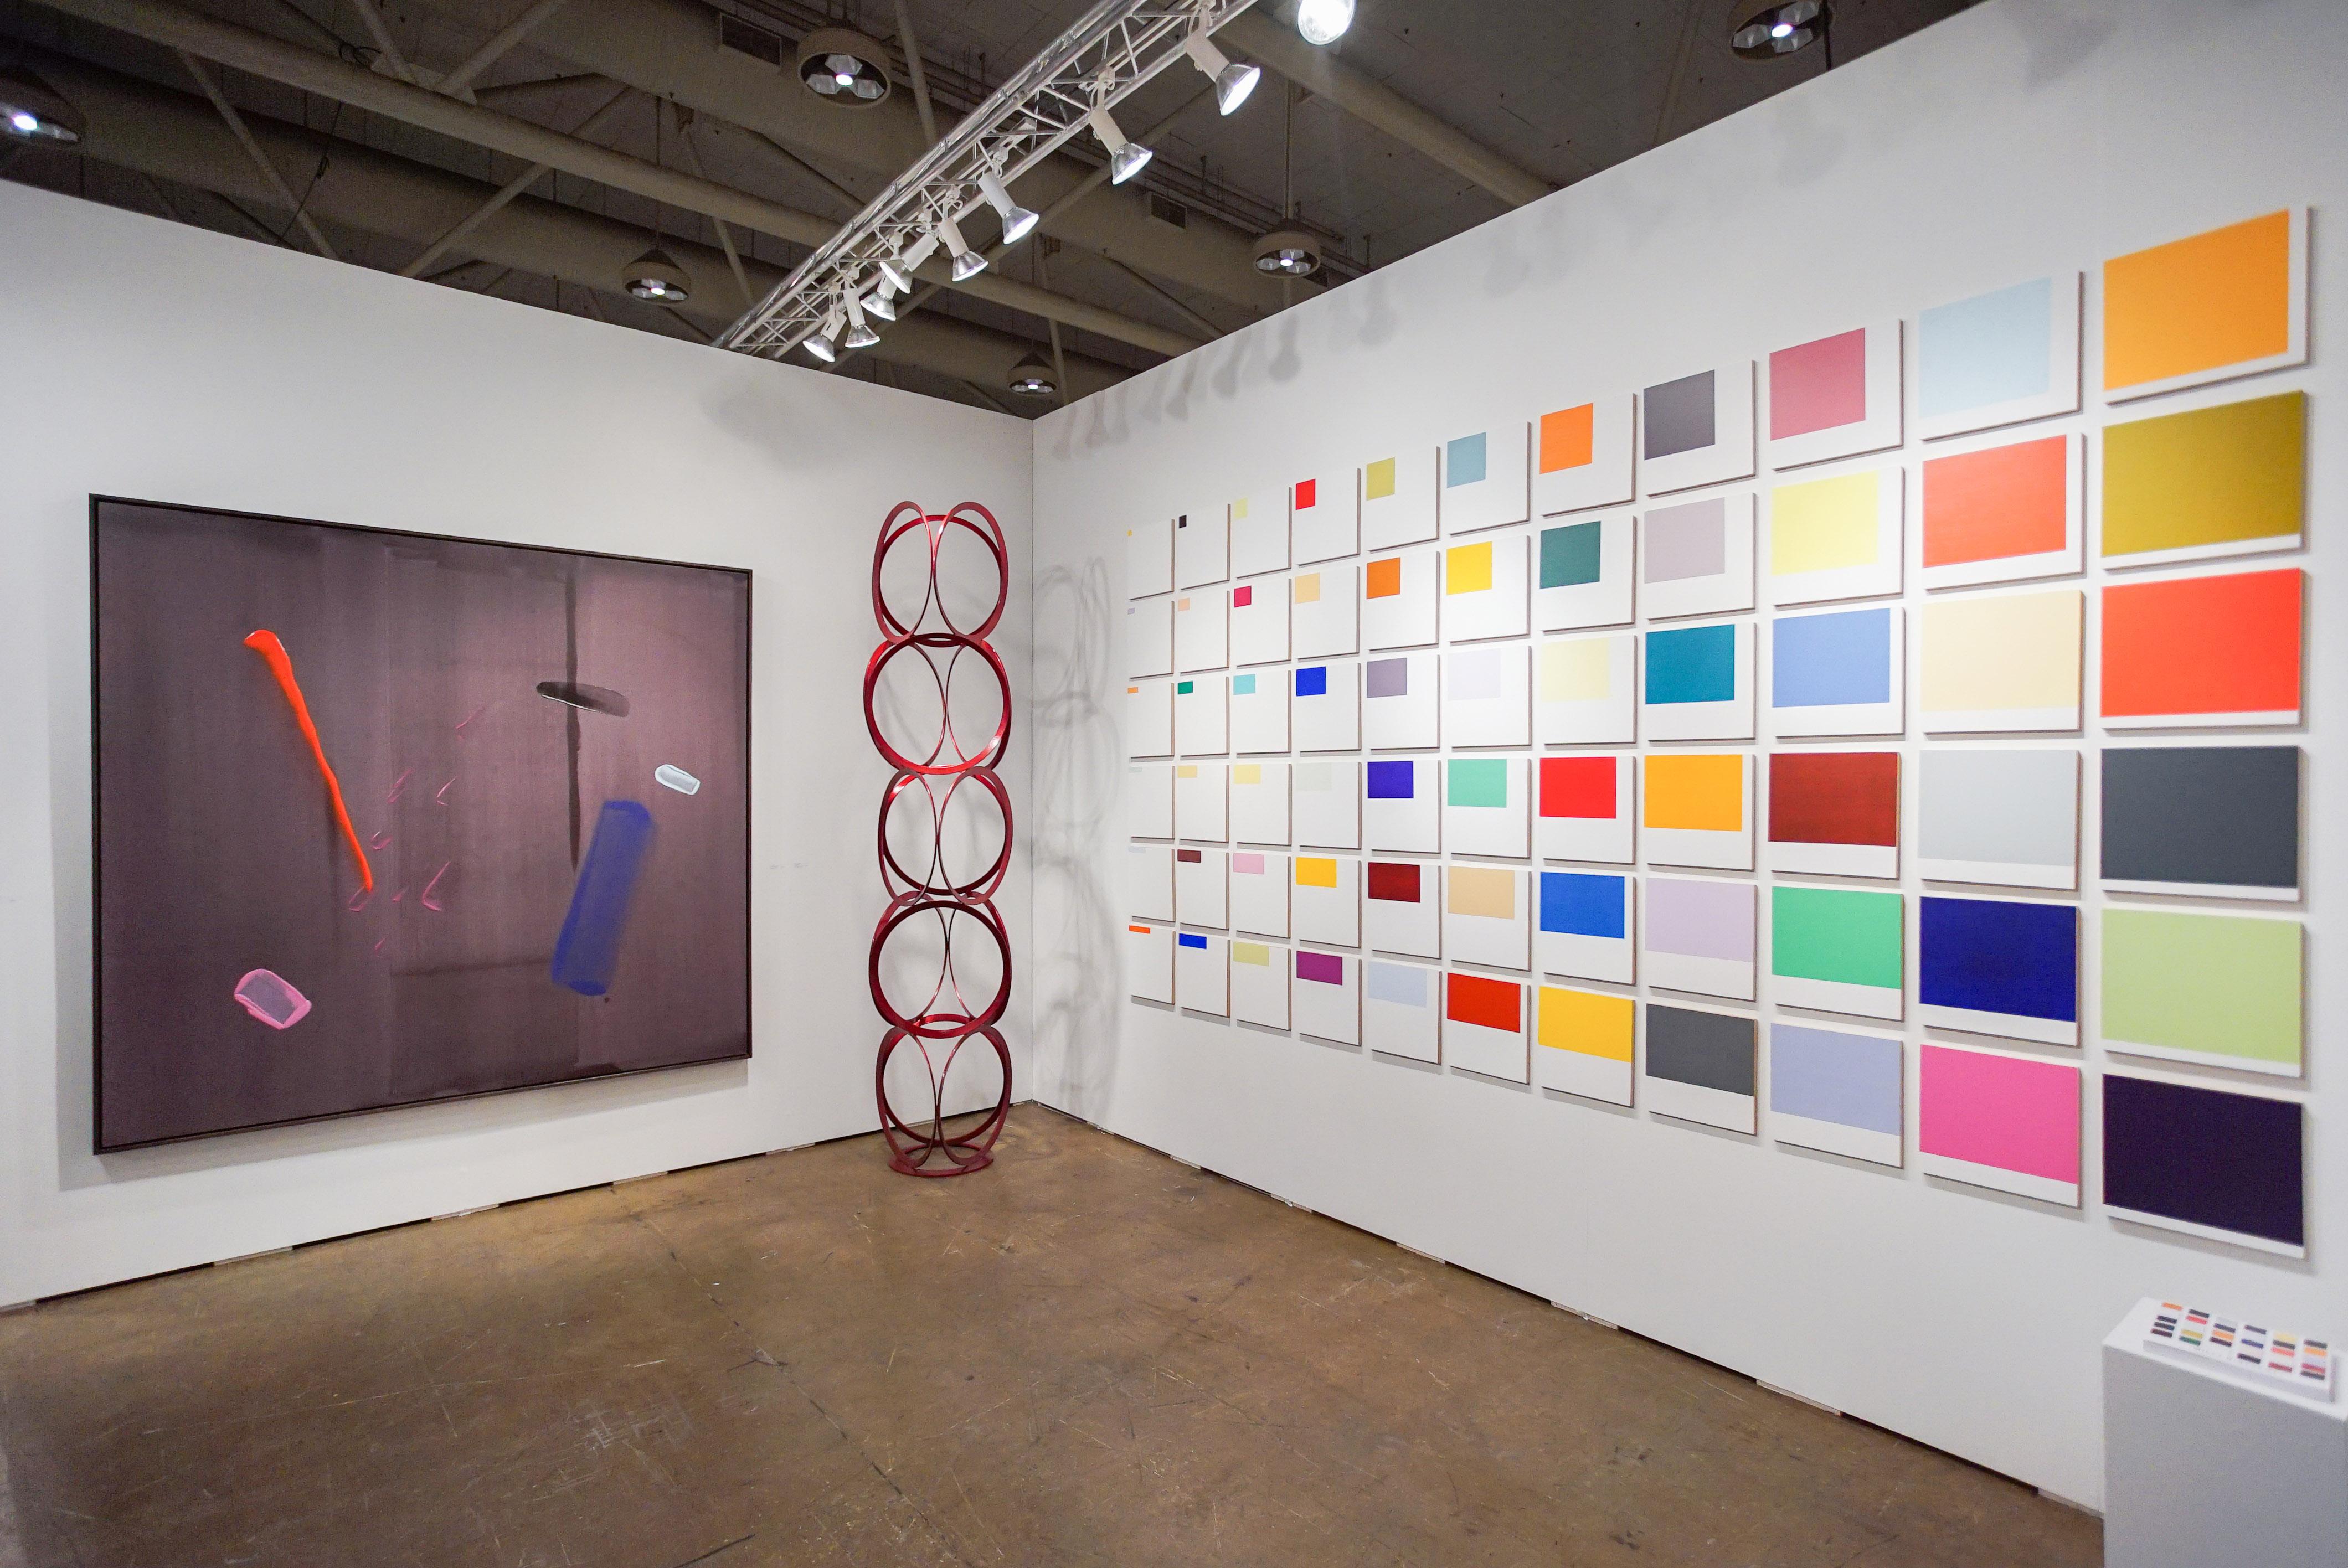 A monumental work, comprised of 66 small square panels, each painted with a single orthogonal, are installed in a precise grid: six high and ten across. The orthogonal panels are painted in solid, specific colors with the area of each increasing